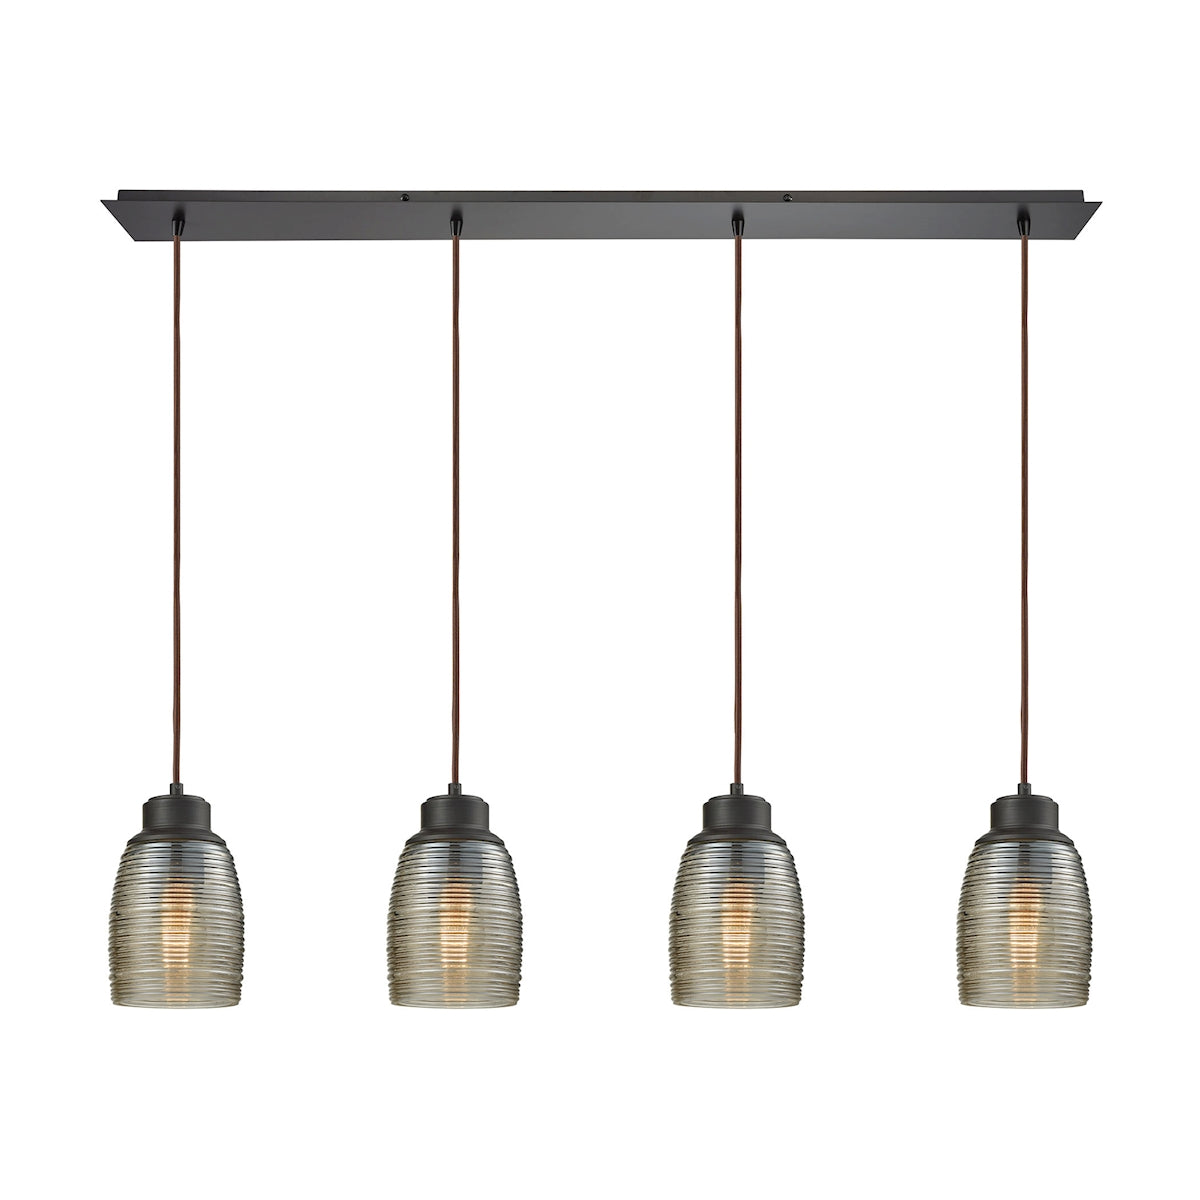 ELK Lighting 46216/4LP Muncie 4-Light Linear Pendant Fixture in Oil Rubbed Bronze with Champagne-plated Spun Glass